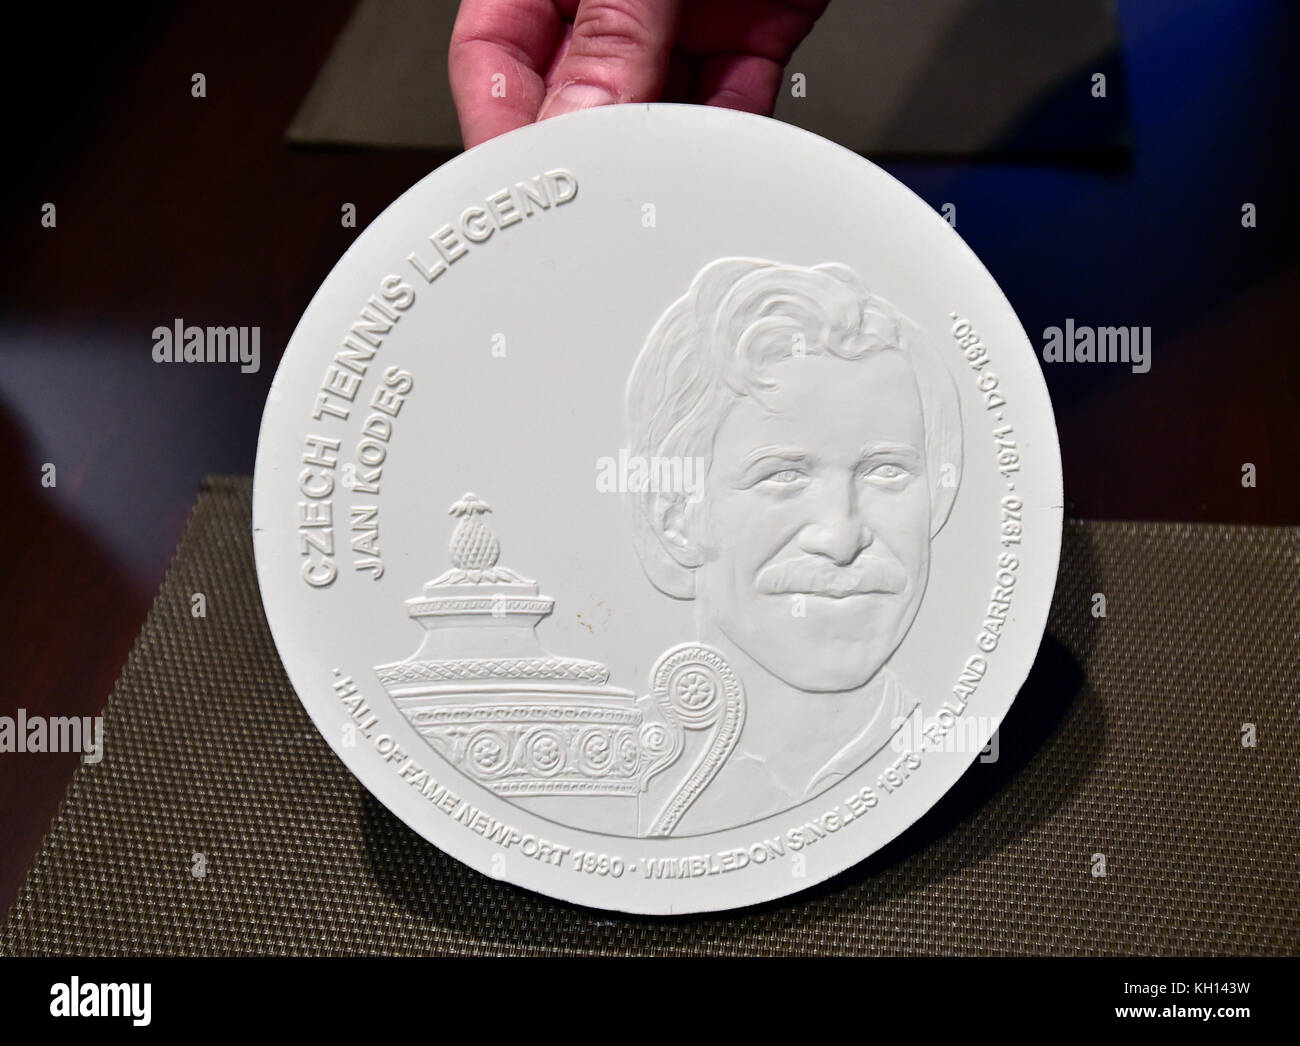 Czech Wimbledon winners Martina Navratilova and Jan Kodes are the first tennis champions to appear on commemorative coins whose gypsum models (on the photo Jan Kodes) the Ceska mincovna (Czech Mint) unveiled today, on Monday, November 13, 2017. The mint itself will take place in Jablonec nad Nisou, north Bohemia, in early 2018'. One can perhaps dream of being on a postage stamp, but being on a coin is truly special,' Navratilova said. Navratilova, a U.S. citizen, is a nine-time Wimbledon winner (in 1978-1990). She defected from the Communist Czechoslovakia to the USA in 1975. Kodes won the Wim Stock Photo